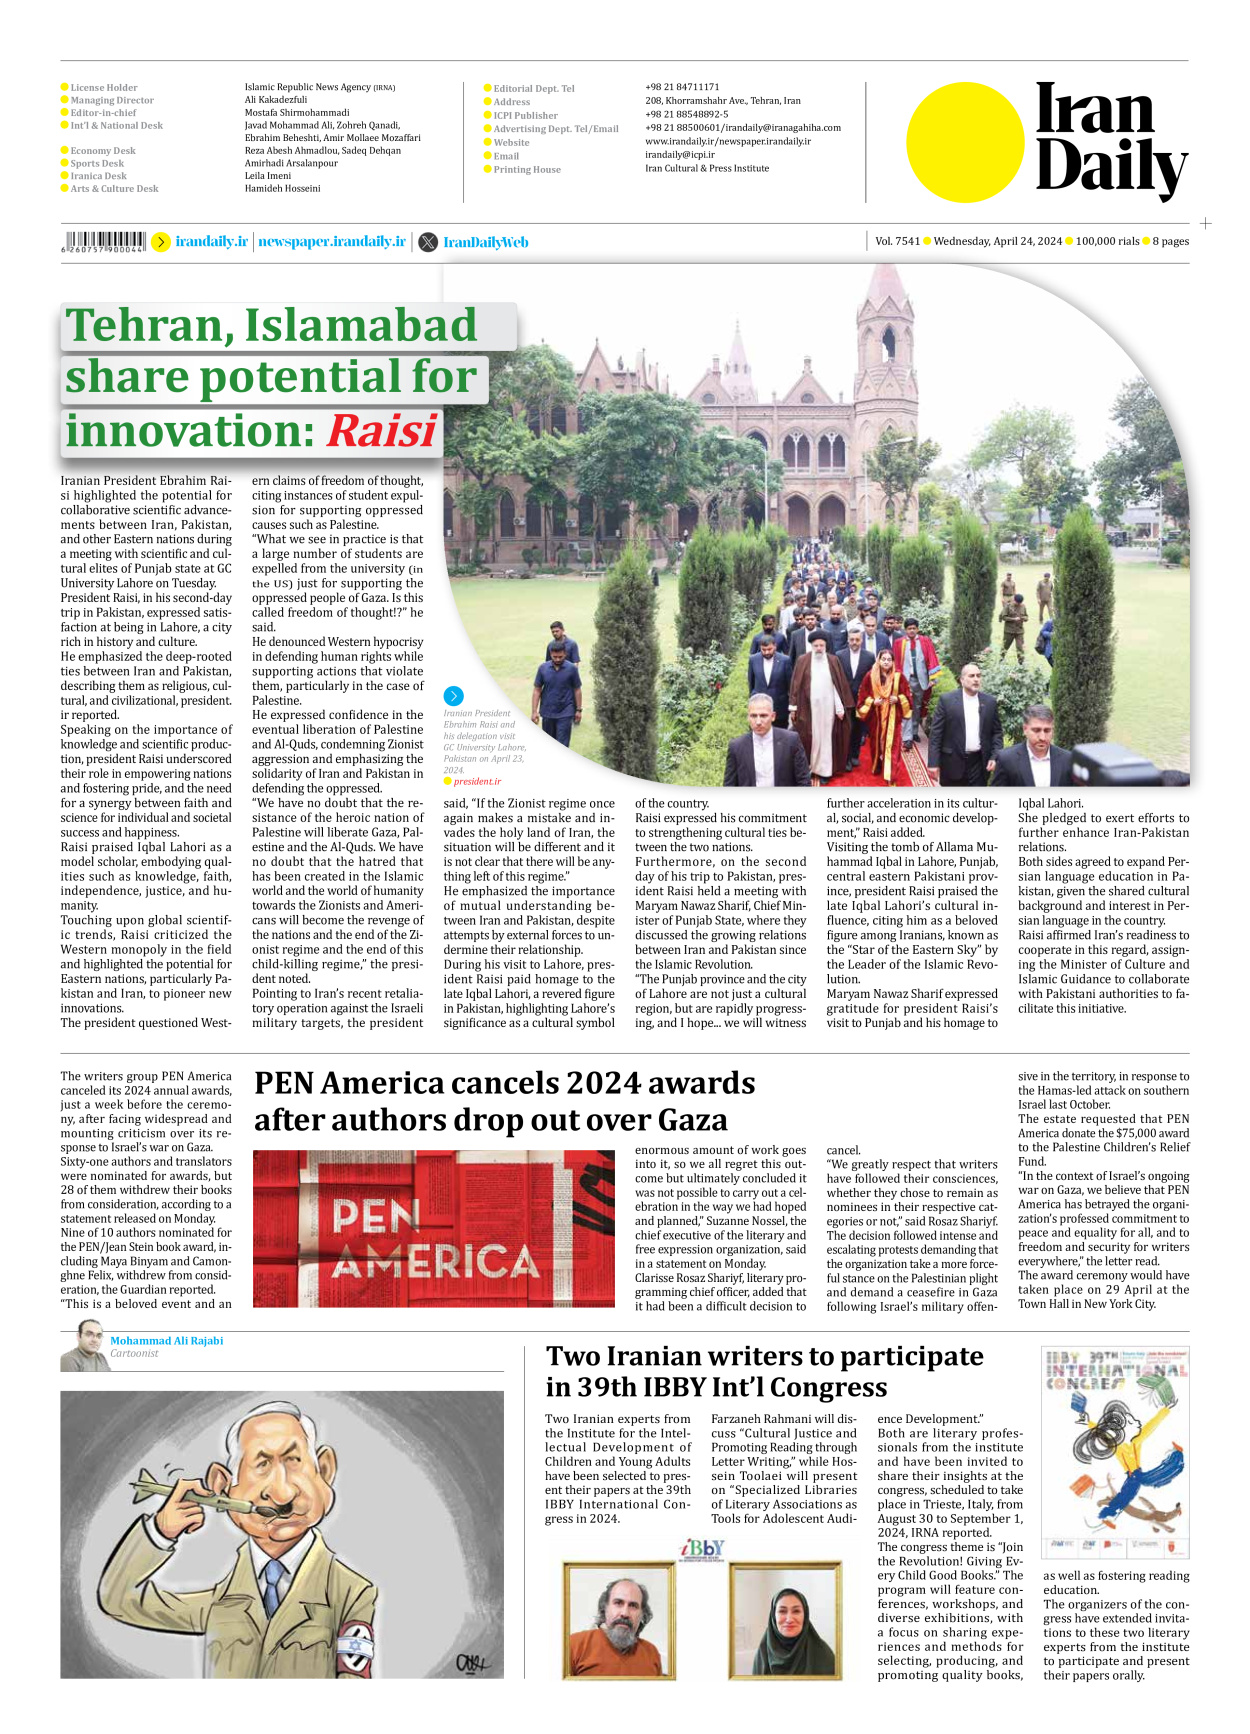 Iran Daily - Number Seven Thousand Five Hundred and Forty One - 24 April 2024 - Page 8